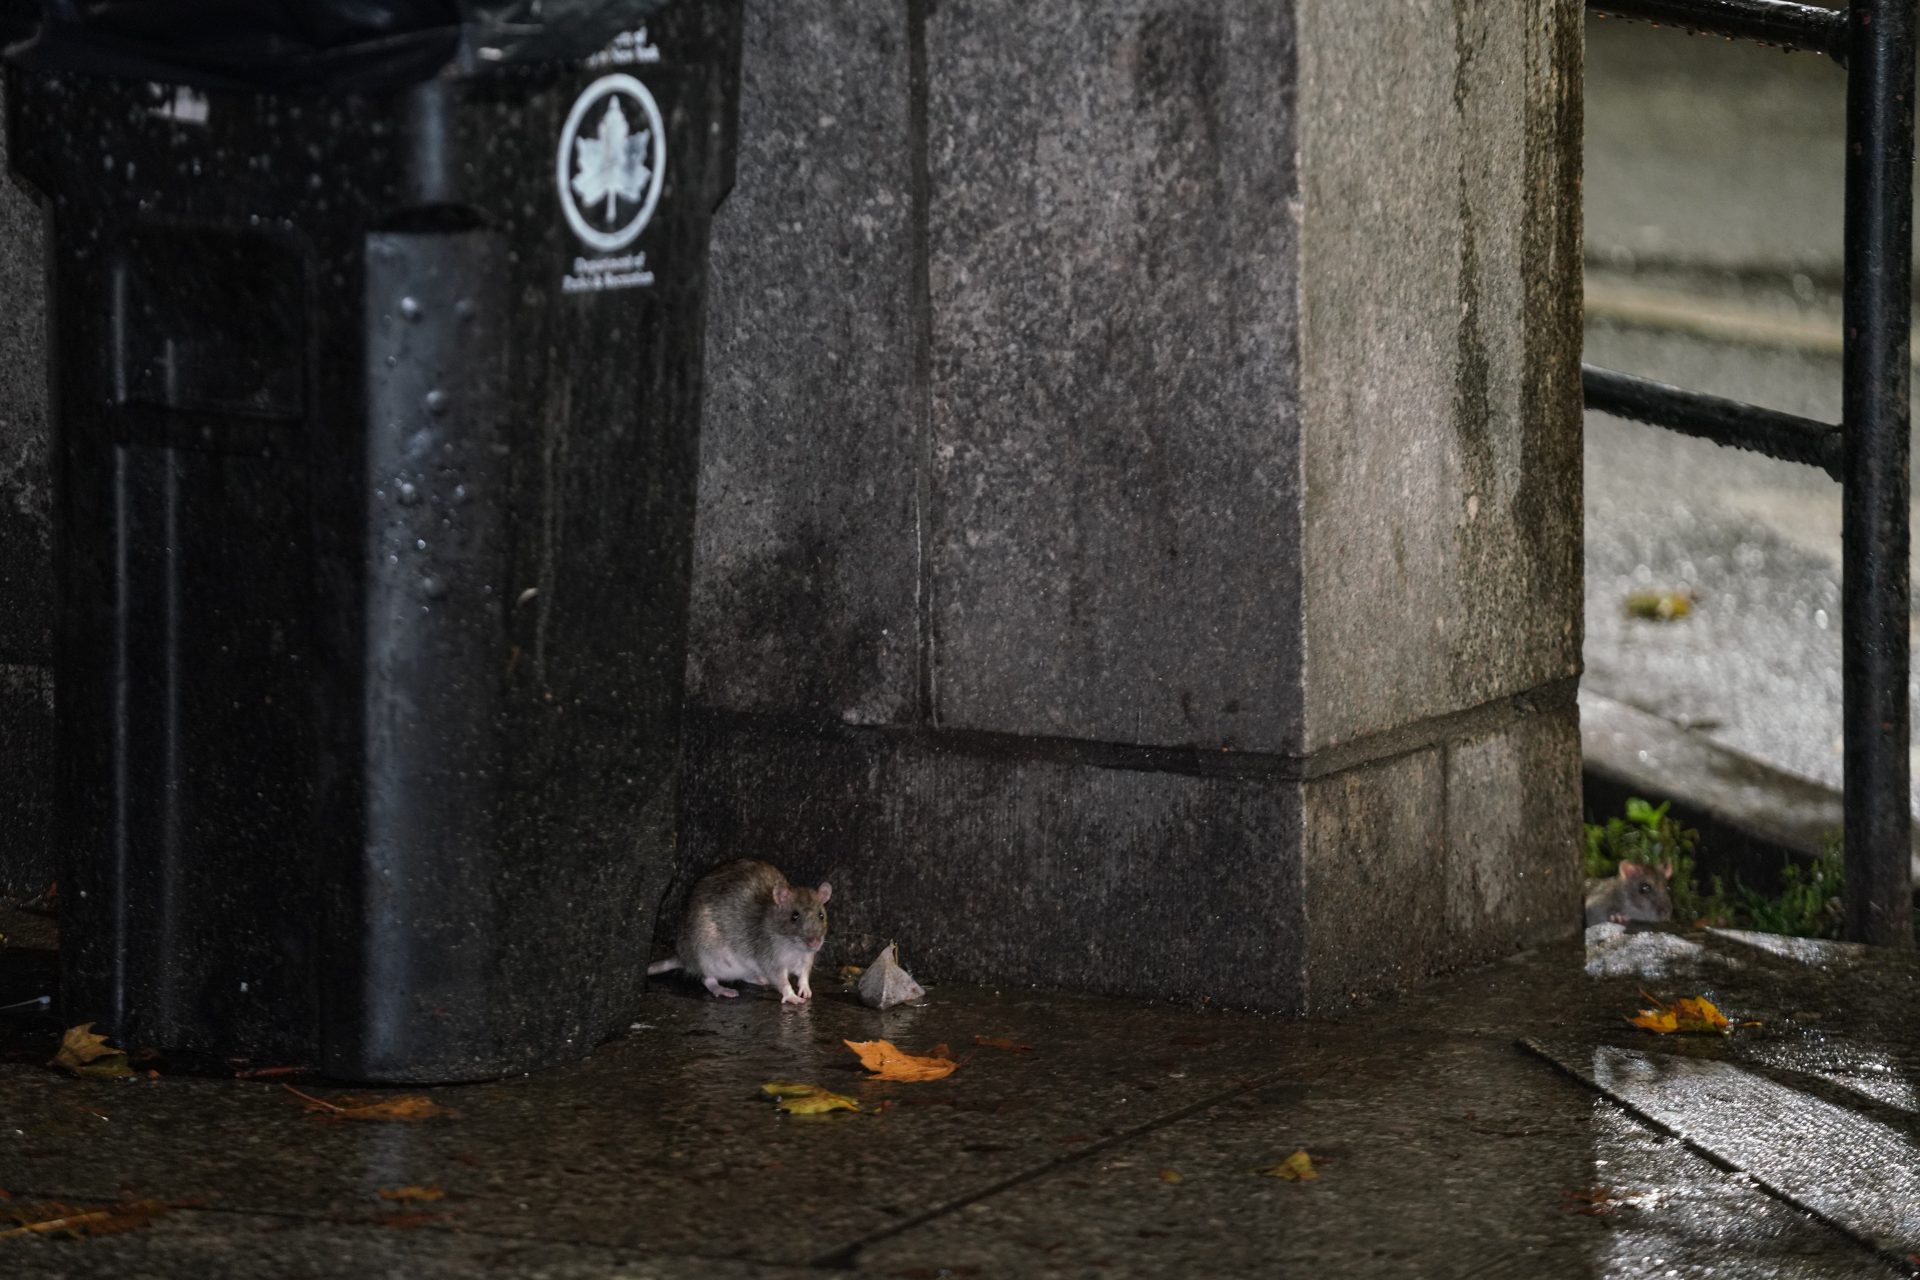 Why are there so many rats in New York?